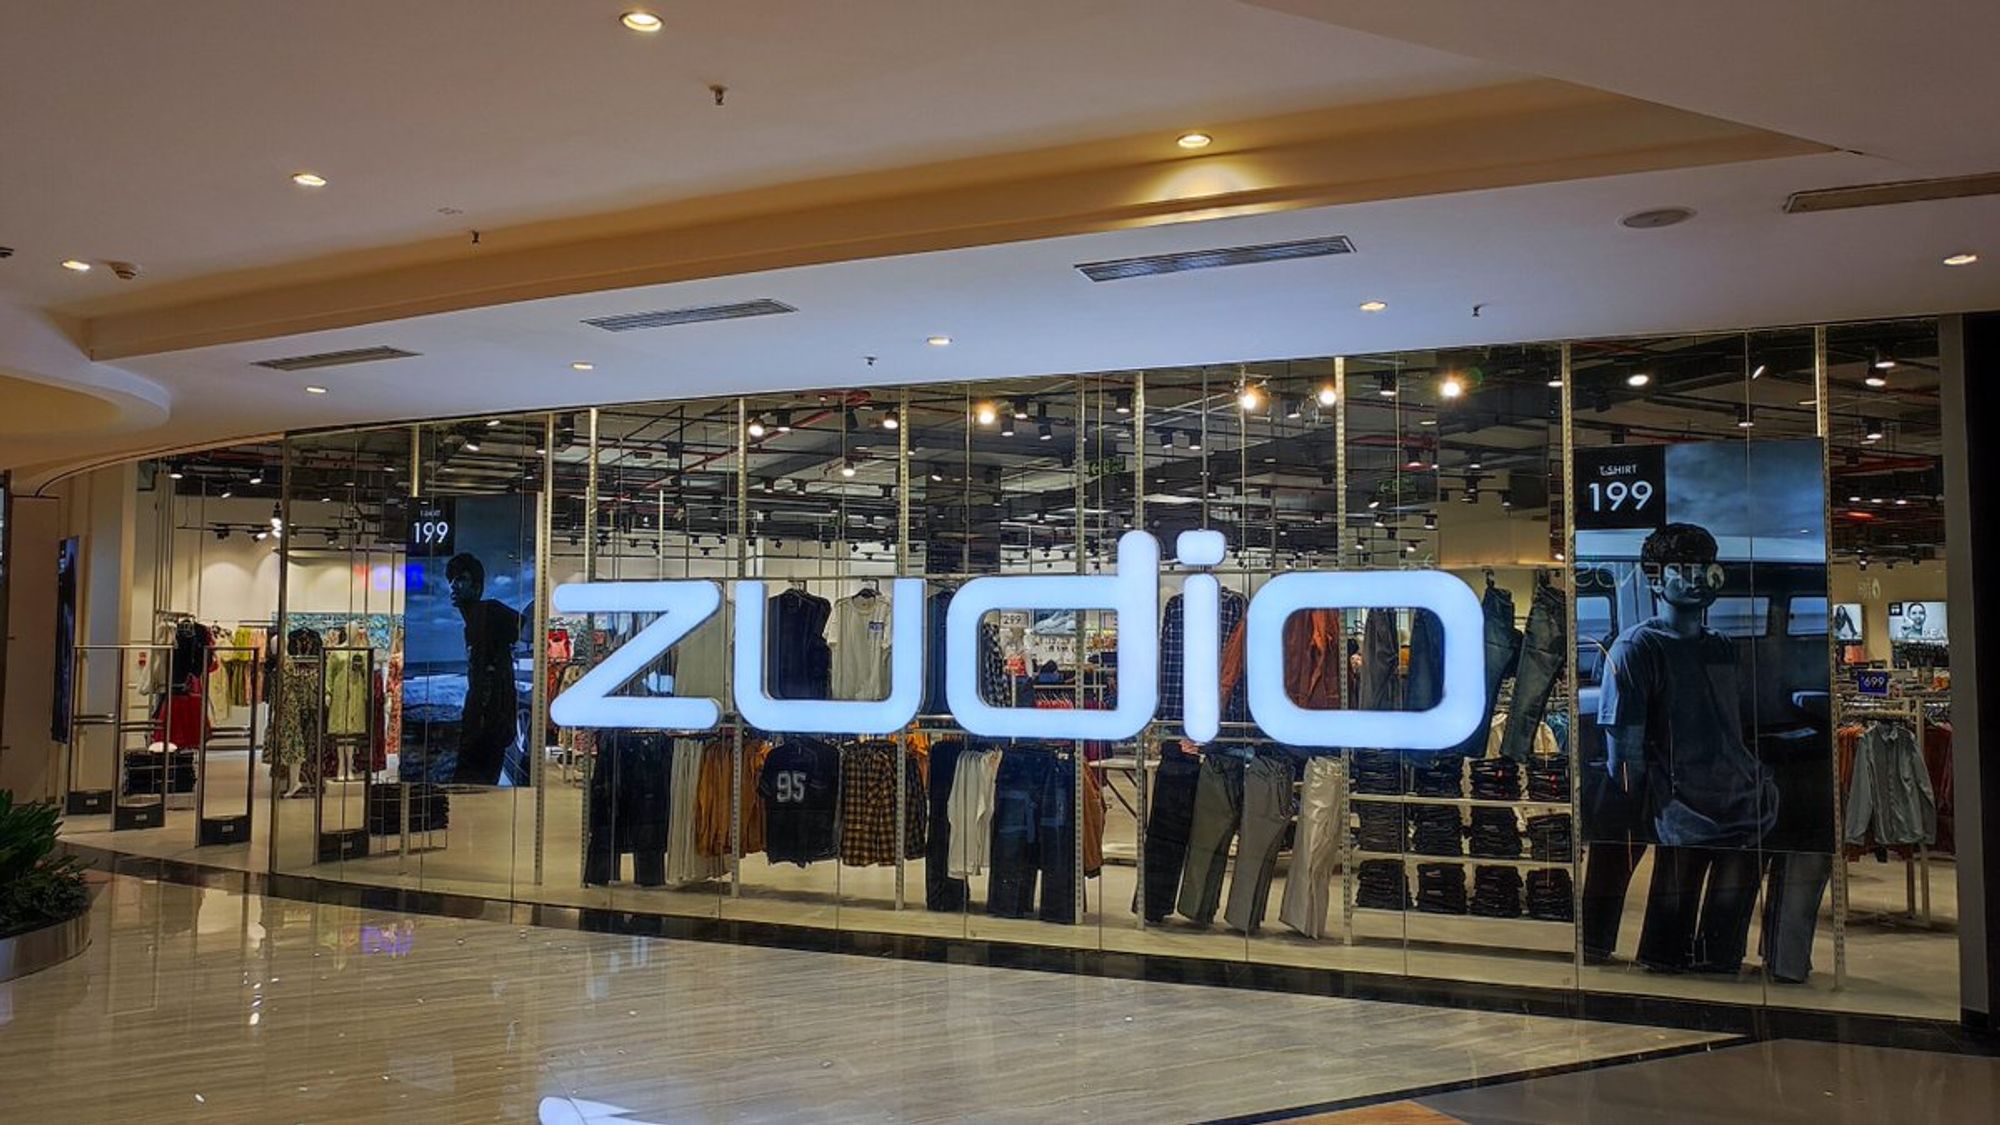 FinFloww on X: Zudio and Westside are the same company! But when they  already had Westside, why make Zudio a standalone brand and maintain 2  brands in the same industry? They don't